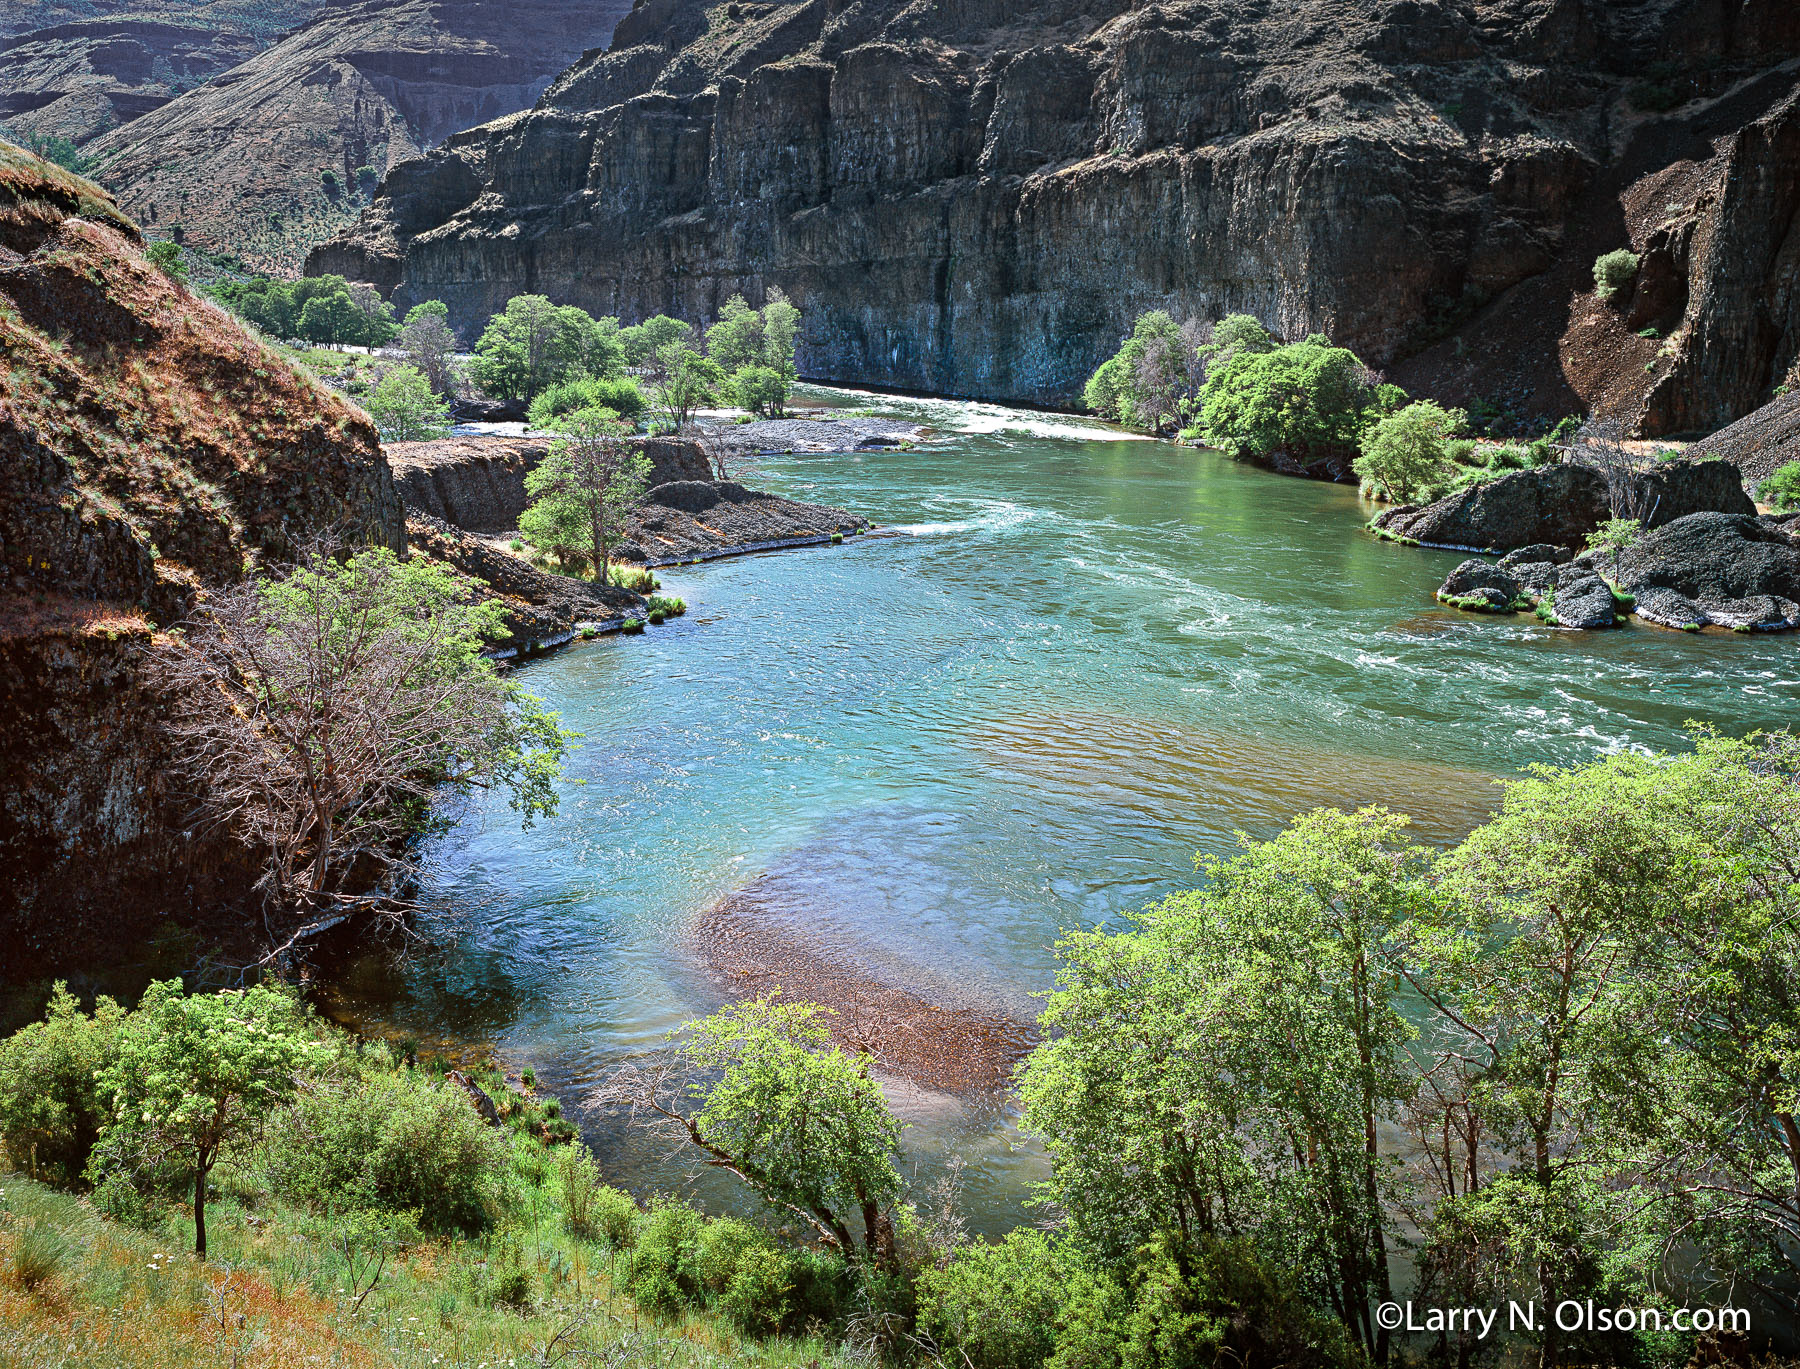 Deschutes River, OR, | A large eddy forms a gravel bar between rapids. Basalt cliffs and Hackberry trees line the banks.